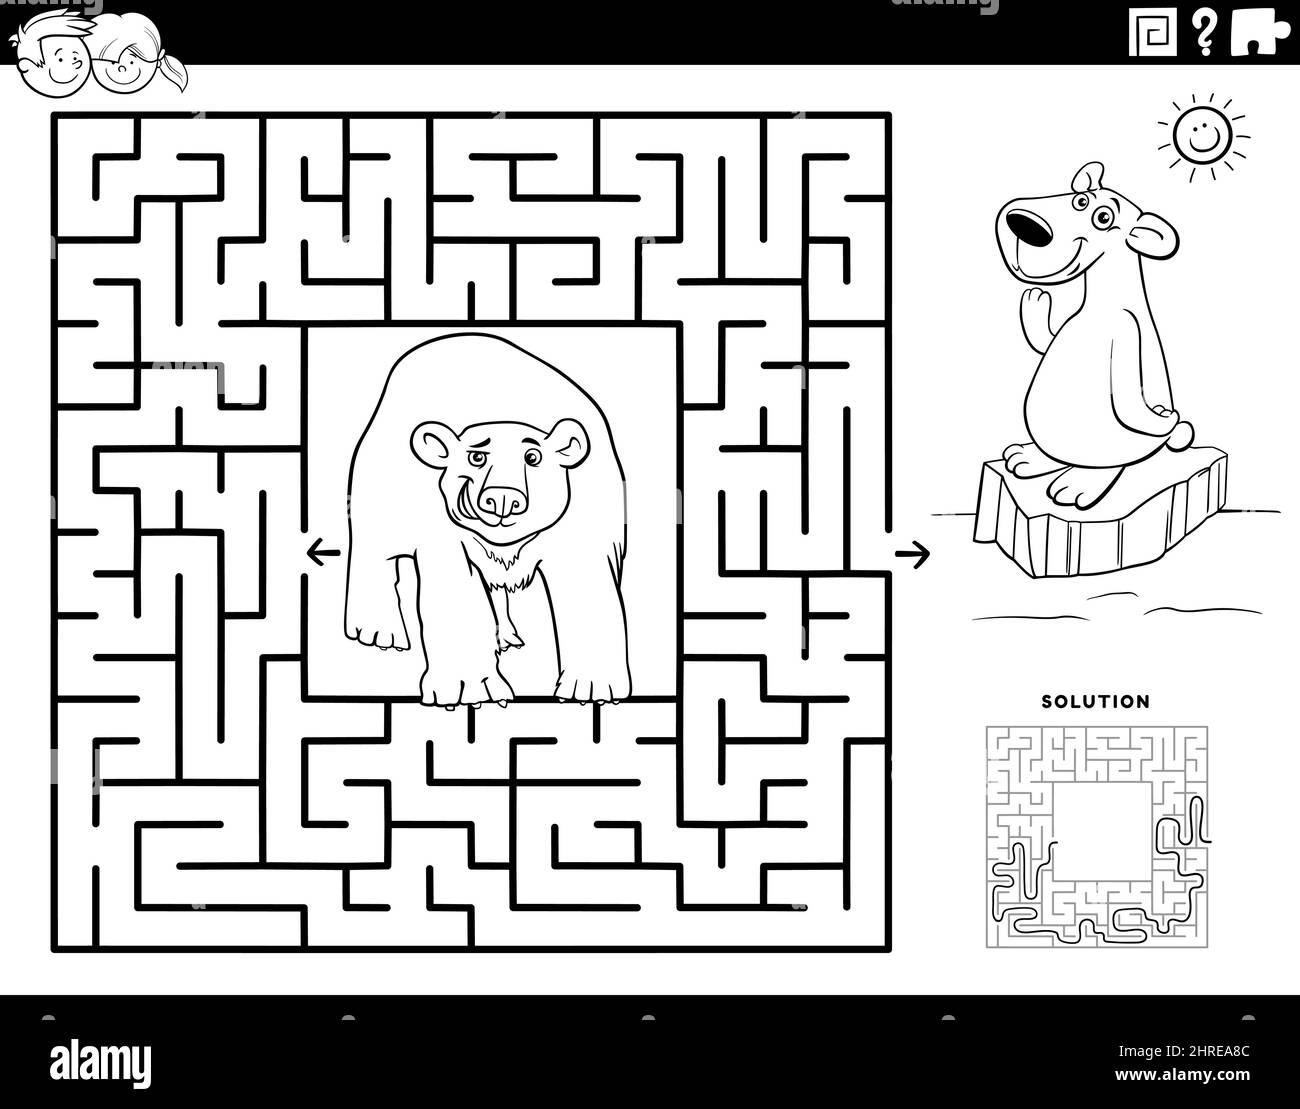 https://c8.alamy.com/comp/2HREA8C/black-and-white-cartoon-illustration-of-educational-maze-puzzle-game-for-children-with-polar-bears-animal-characters-coloring-book-page-2HREA8C.jpg